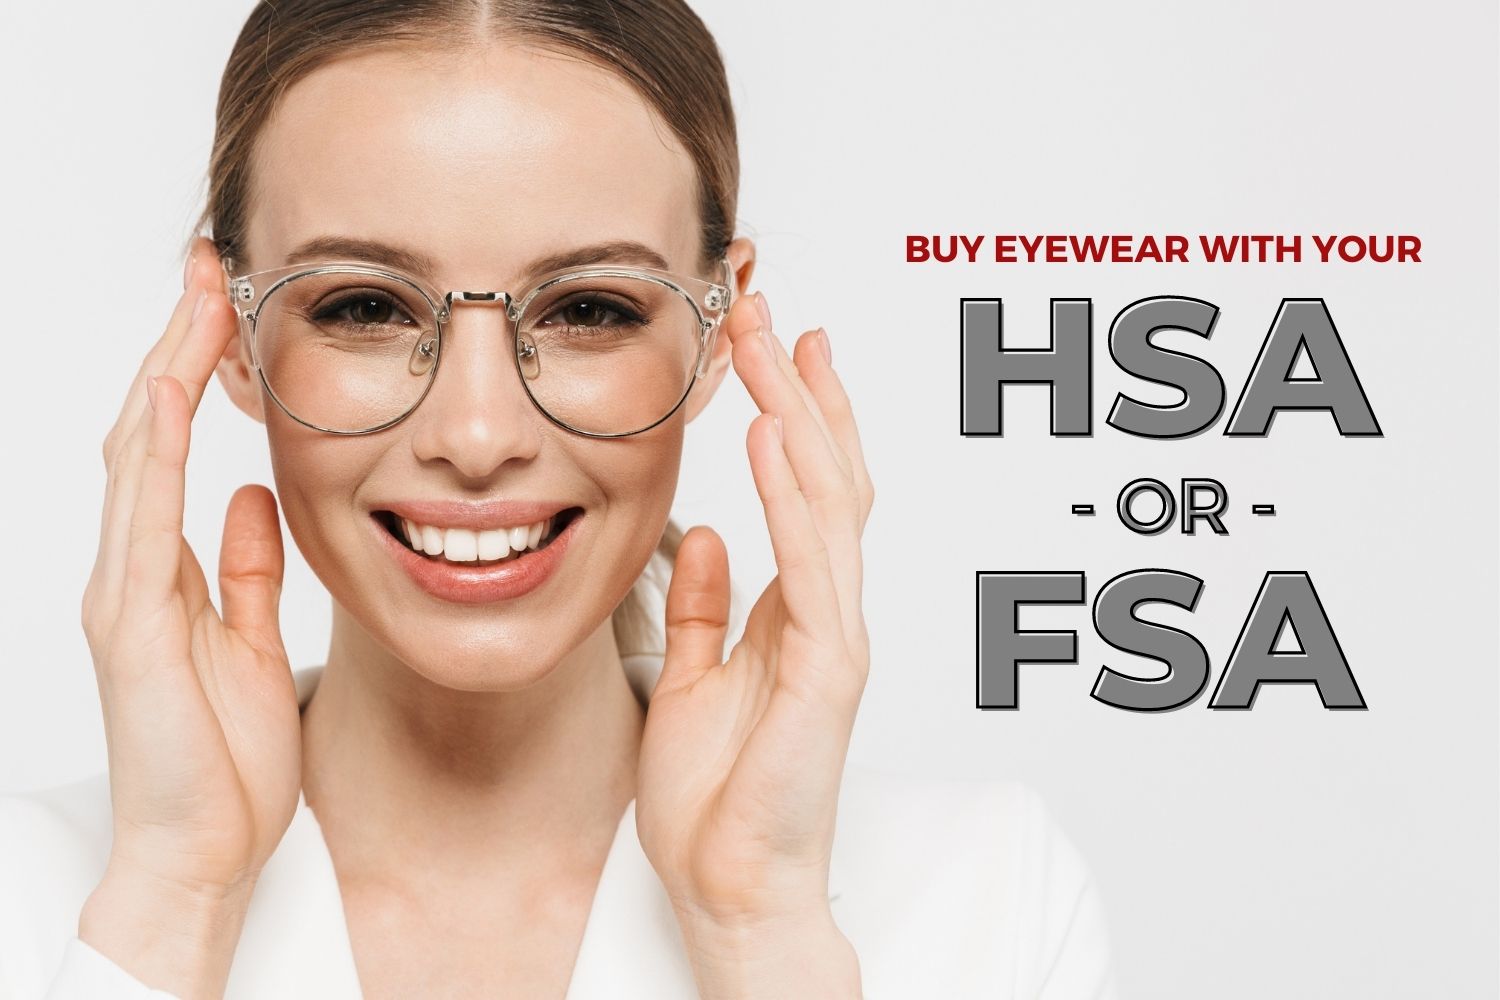 Smart Shopping: Use Your HSA and FSA Funds to Buy Eyewear